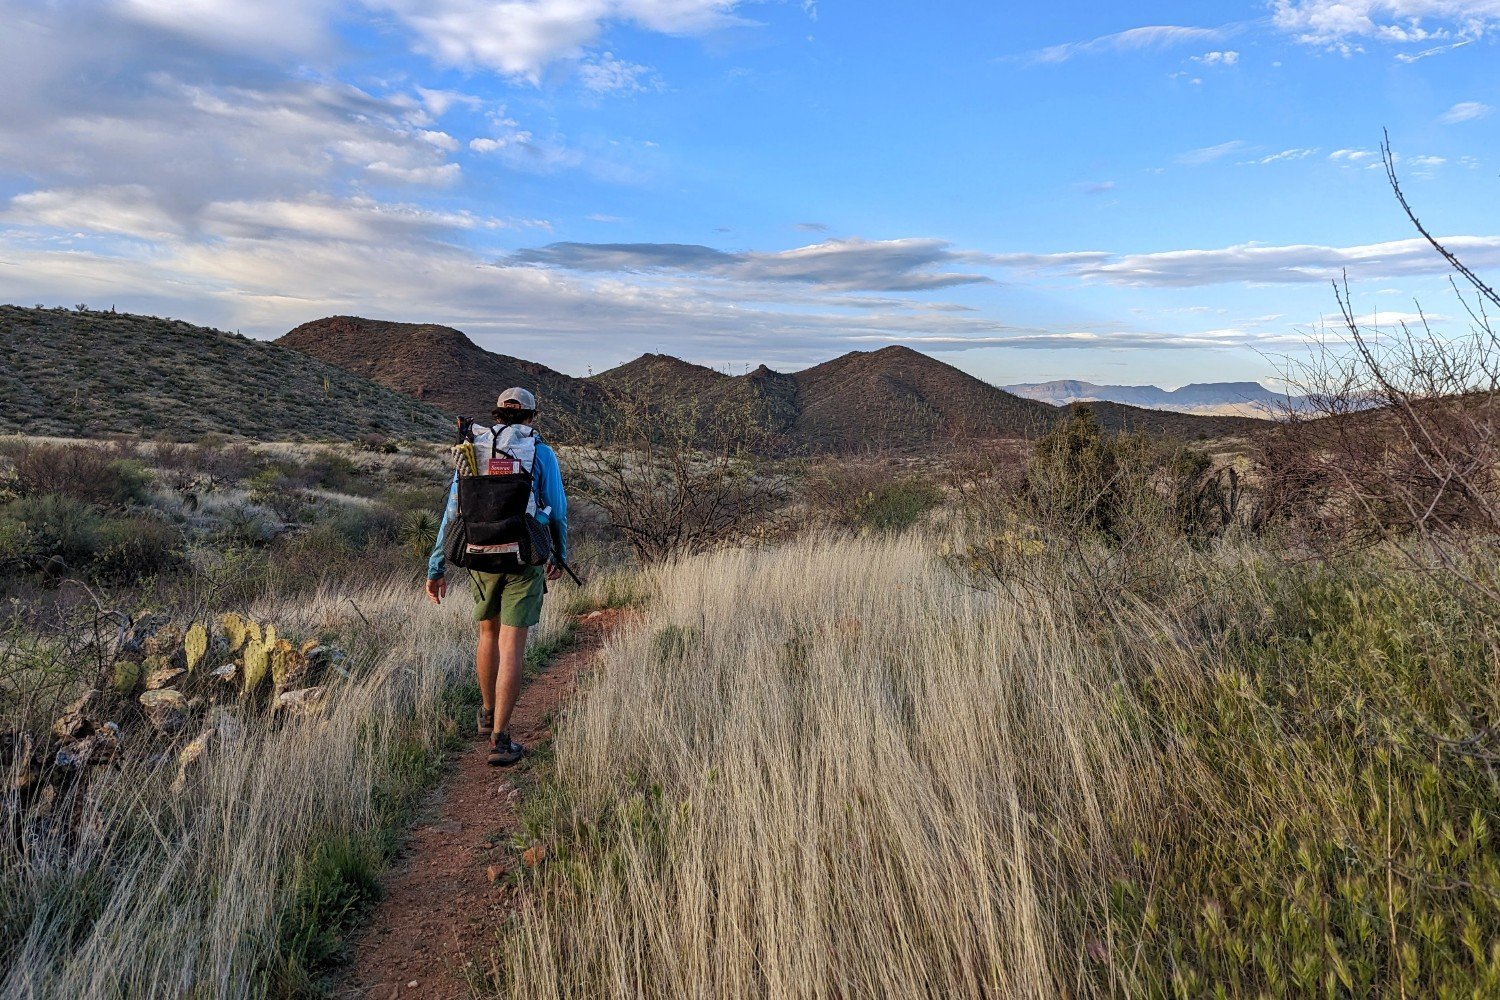 A backpacker wearing REIs Trailmade Amphib shorts hiking on a trail in the desert thats lined with dry grass and cacti - there are cactus covered mountains in the distance